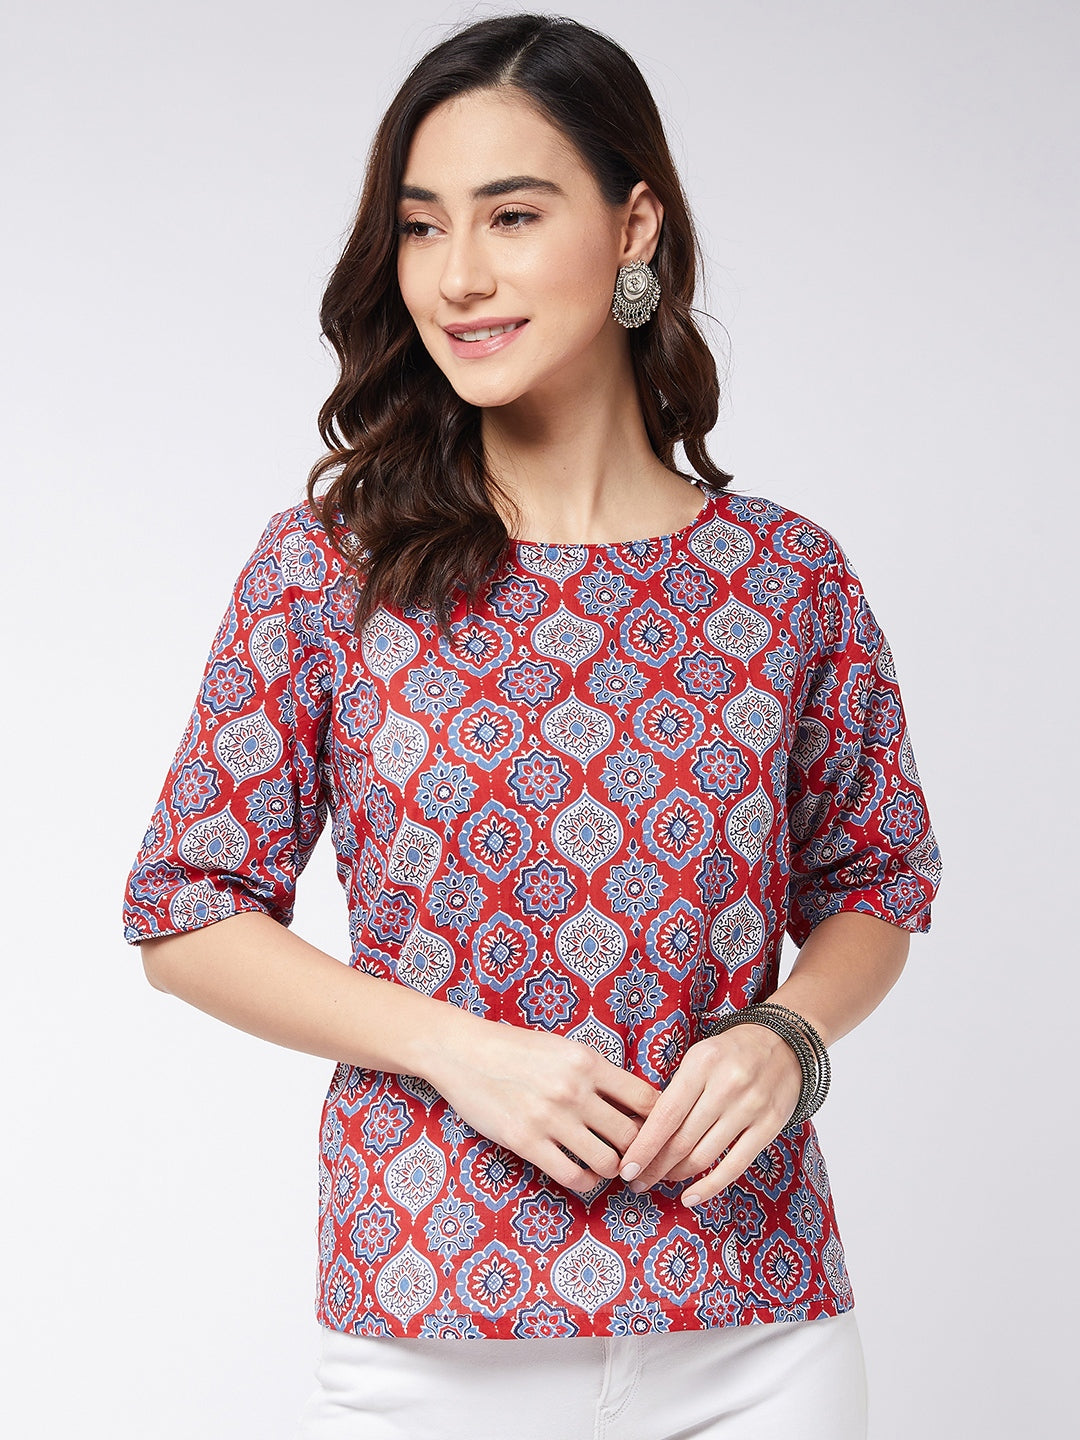 Red Ethnic Print Top